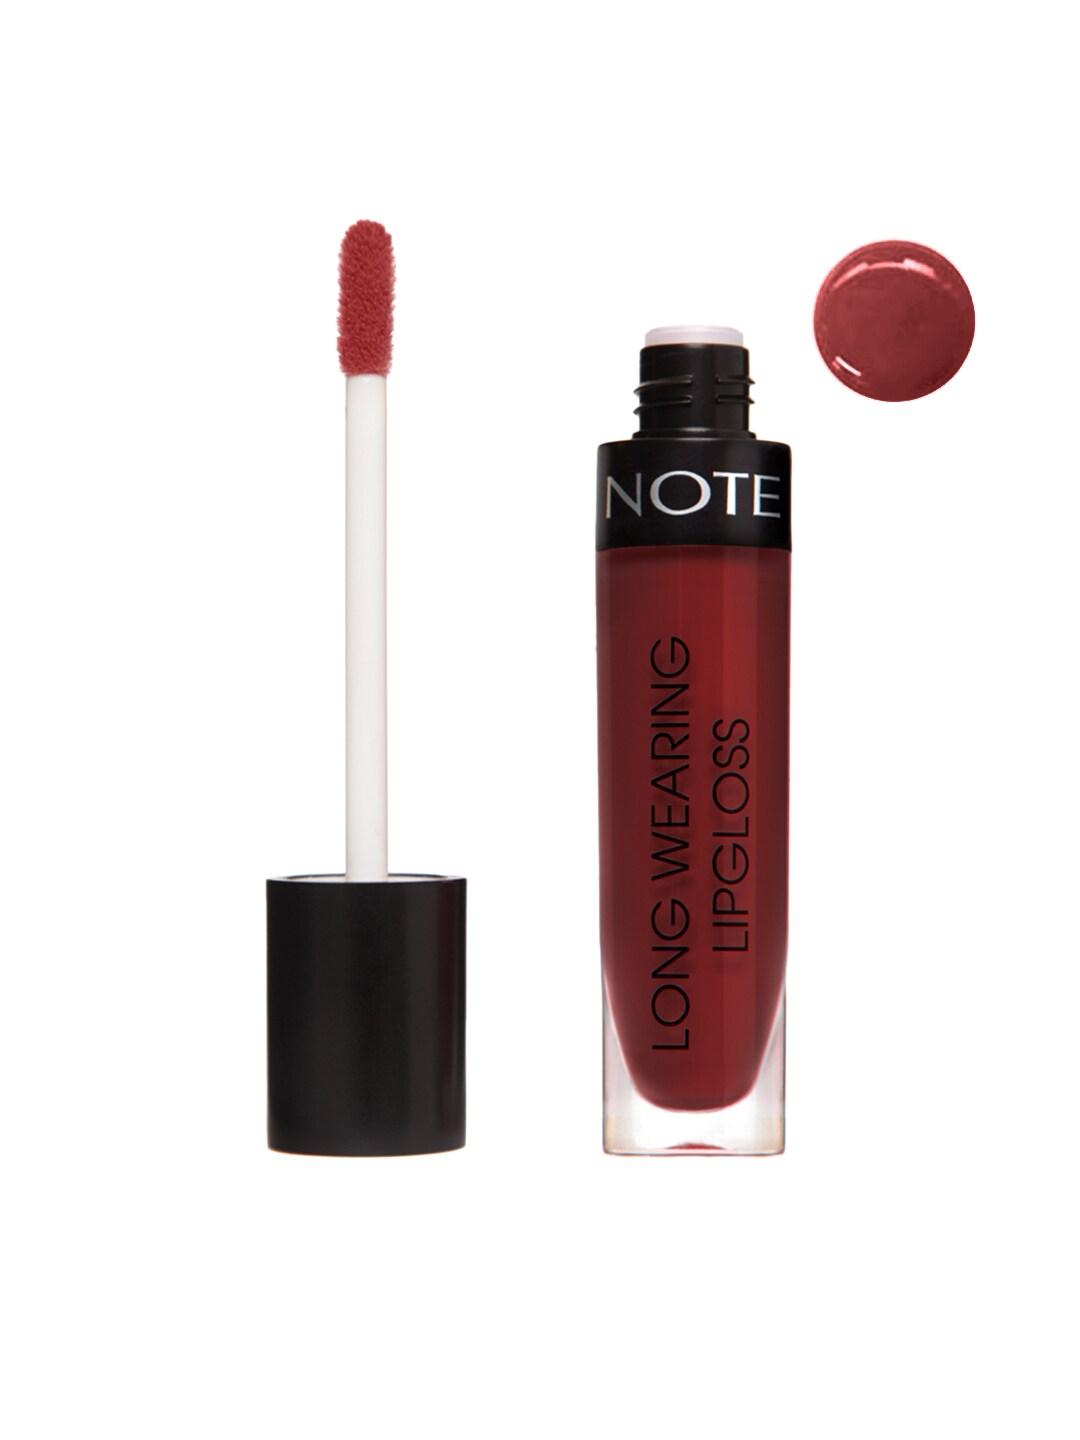 Note Hot Red Long Wearing Lip Gloss 20 Price in India